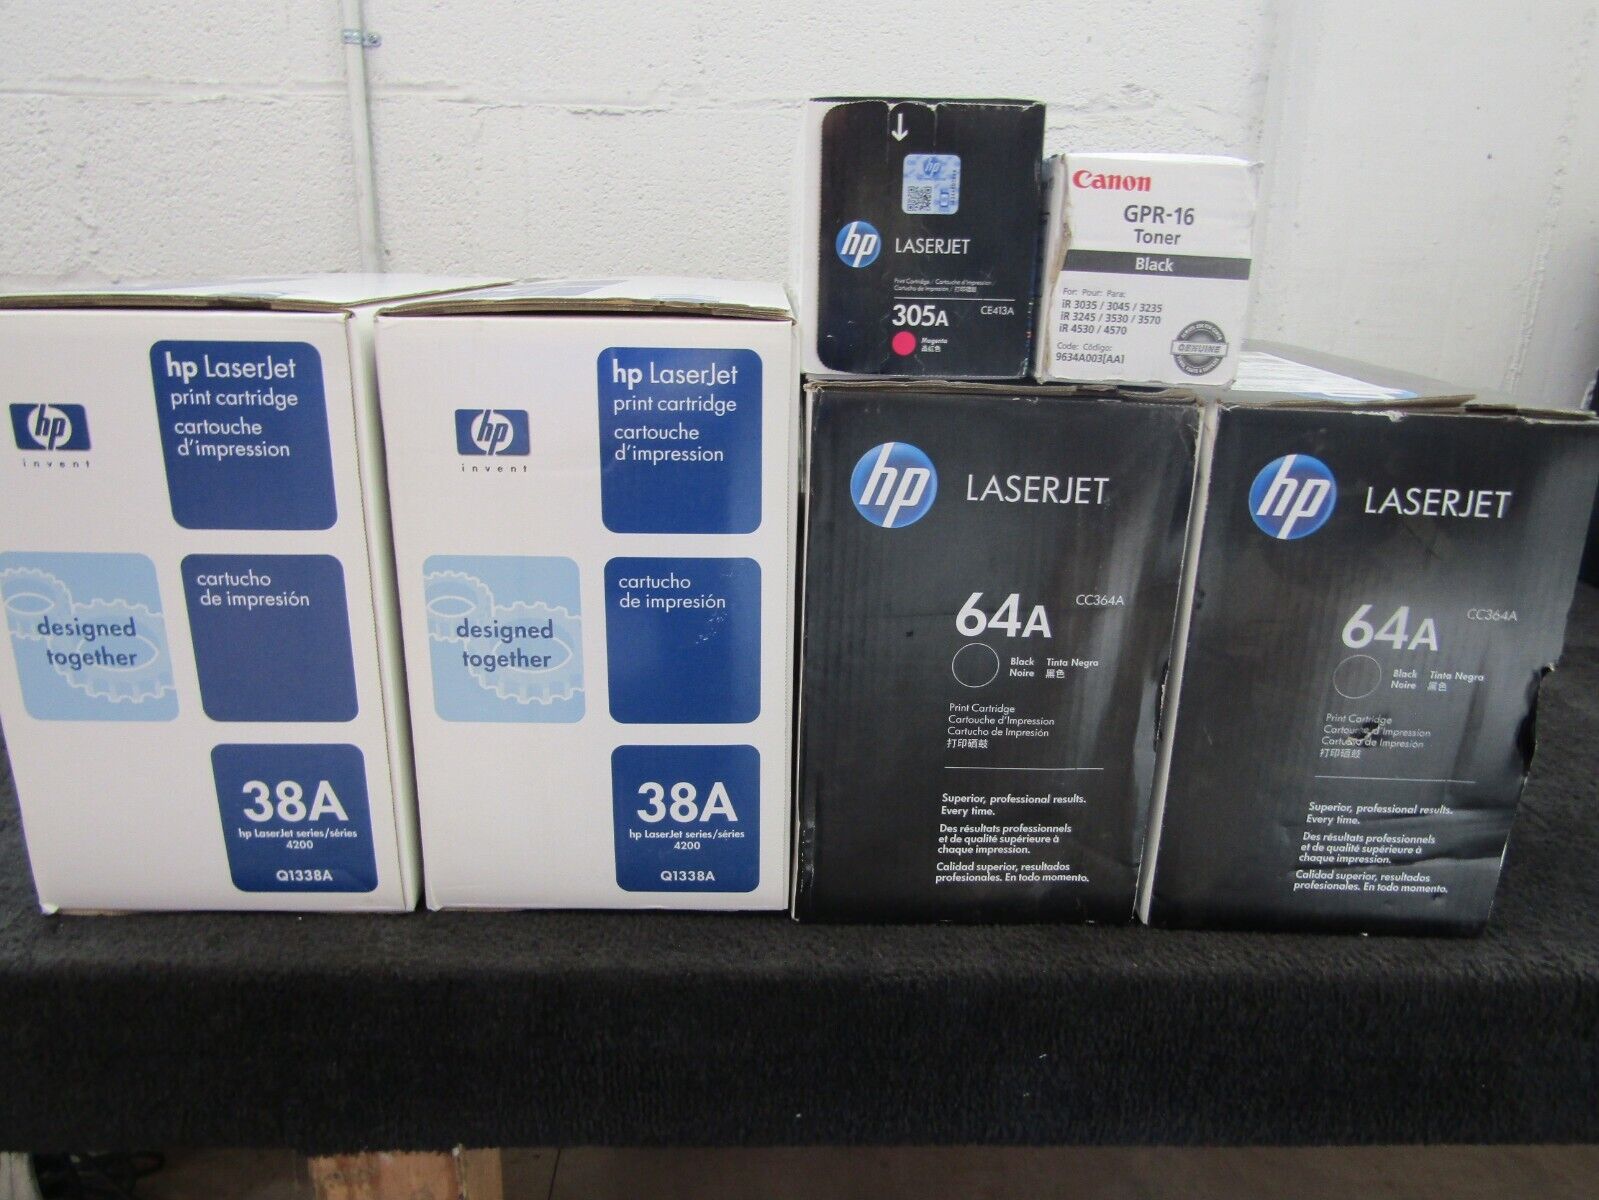 LOT of 6 Toner HP and Canon - 38A - 64A - 305A - GPR-16 - SEALED